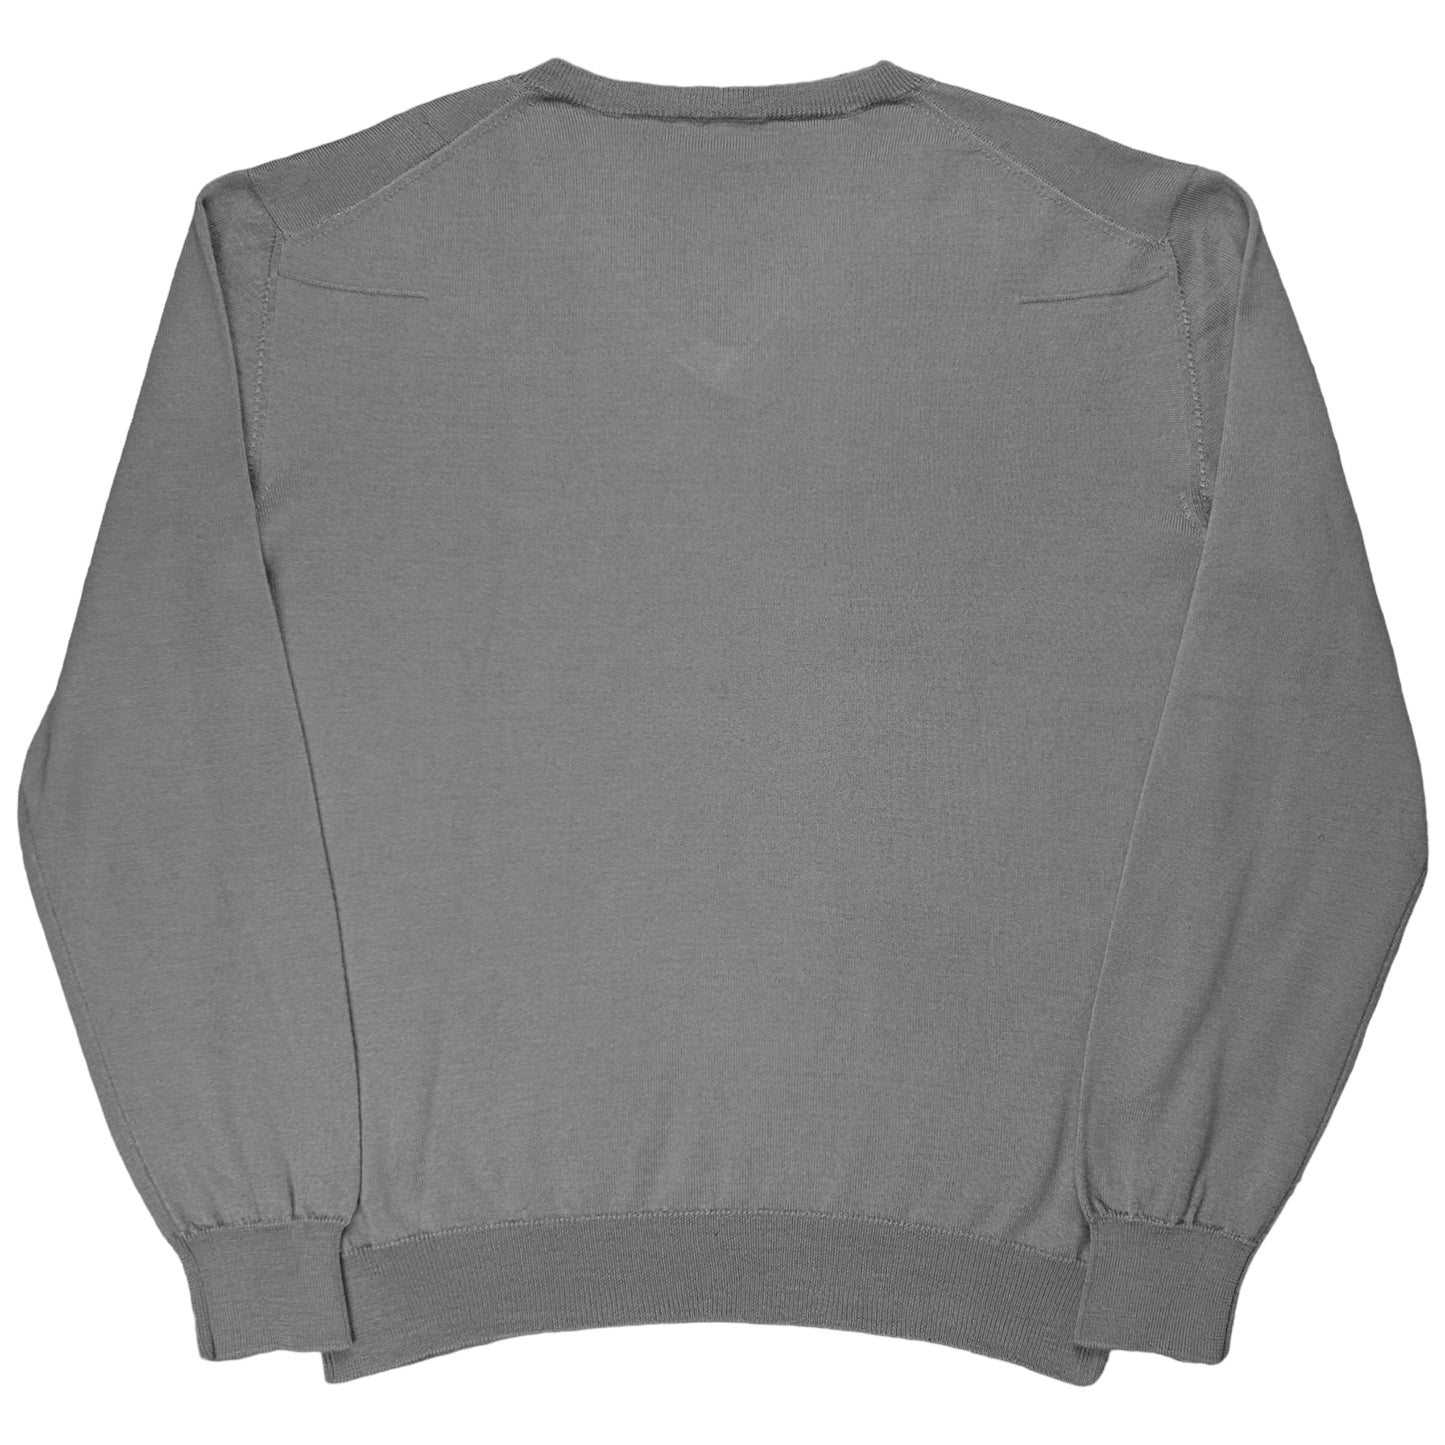 Dior Homme Distorted Lines V-Neck Sweater - AW11